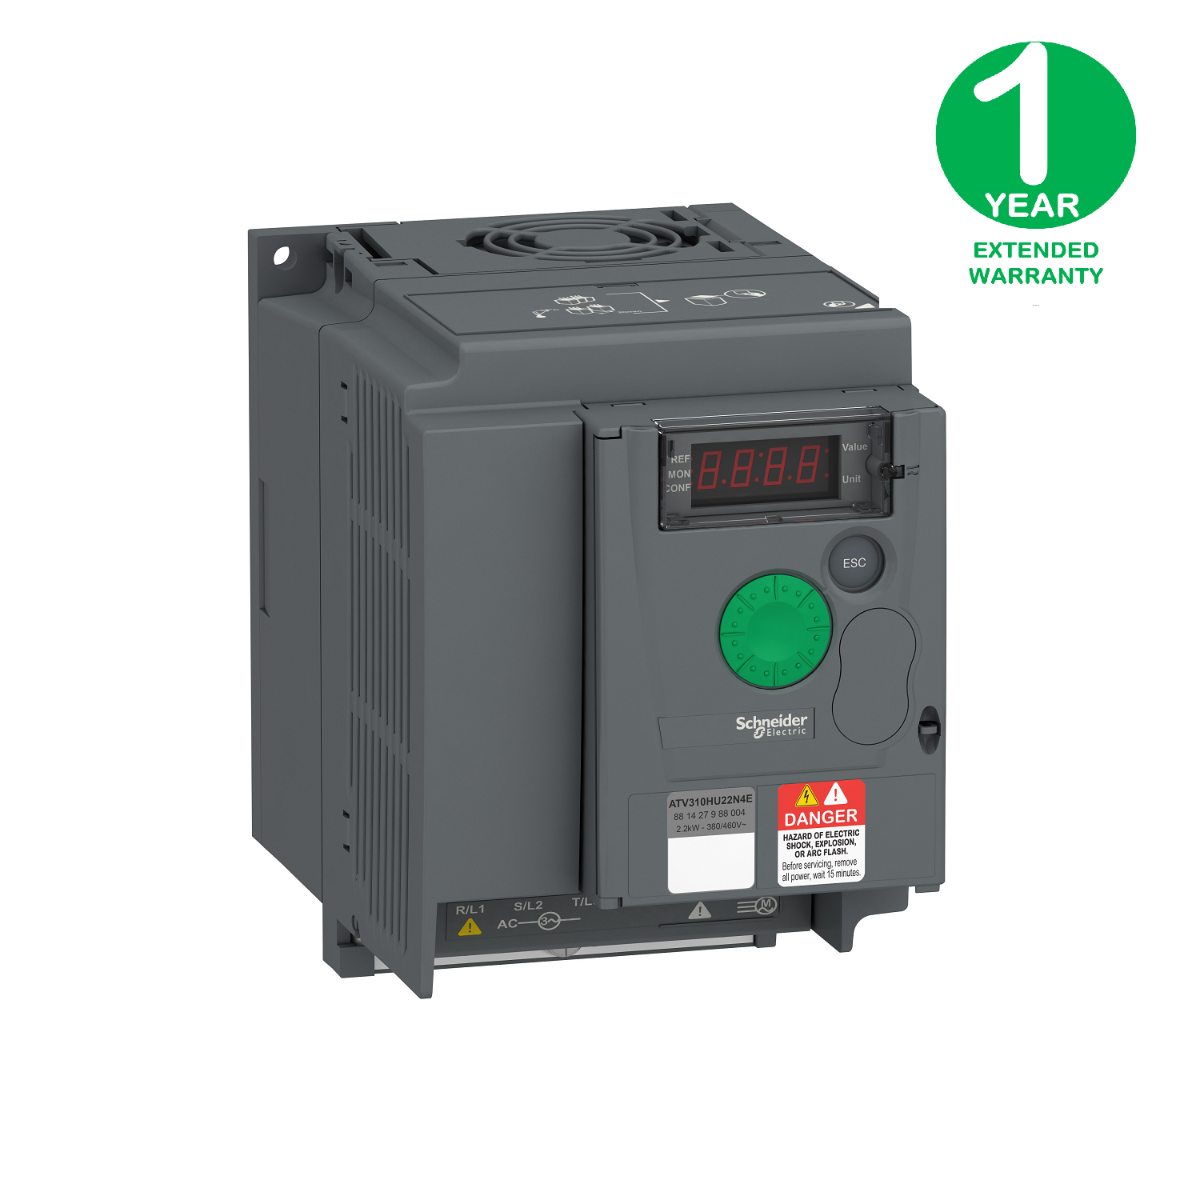 variable speed drive ATV310, 2.2 kW, 3 hp, 380...460 V, 3 phase, without filter + Extended Warranty 1 year